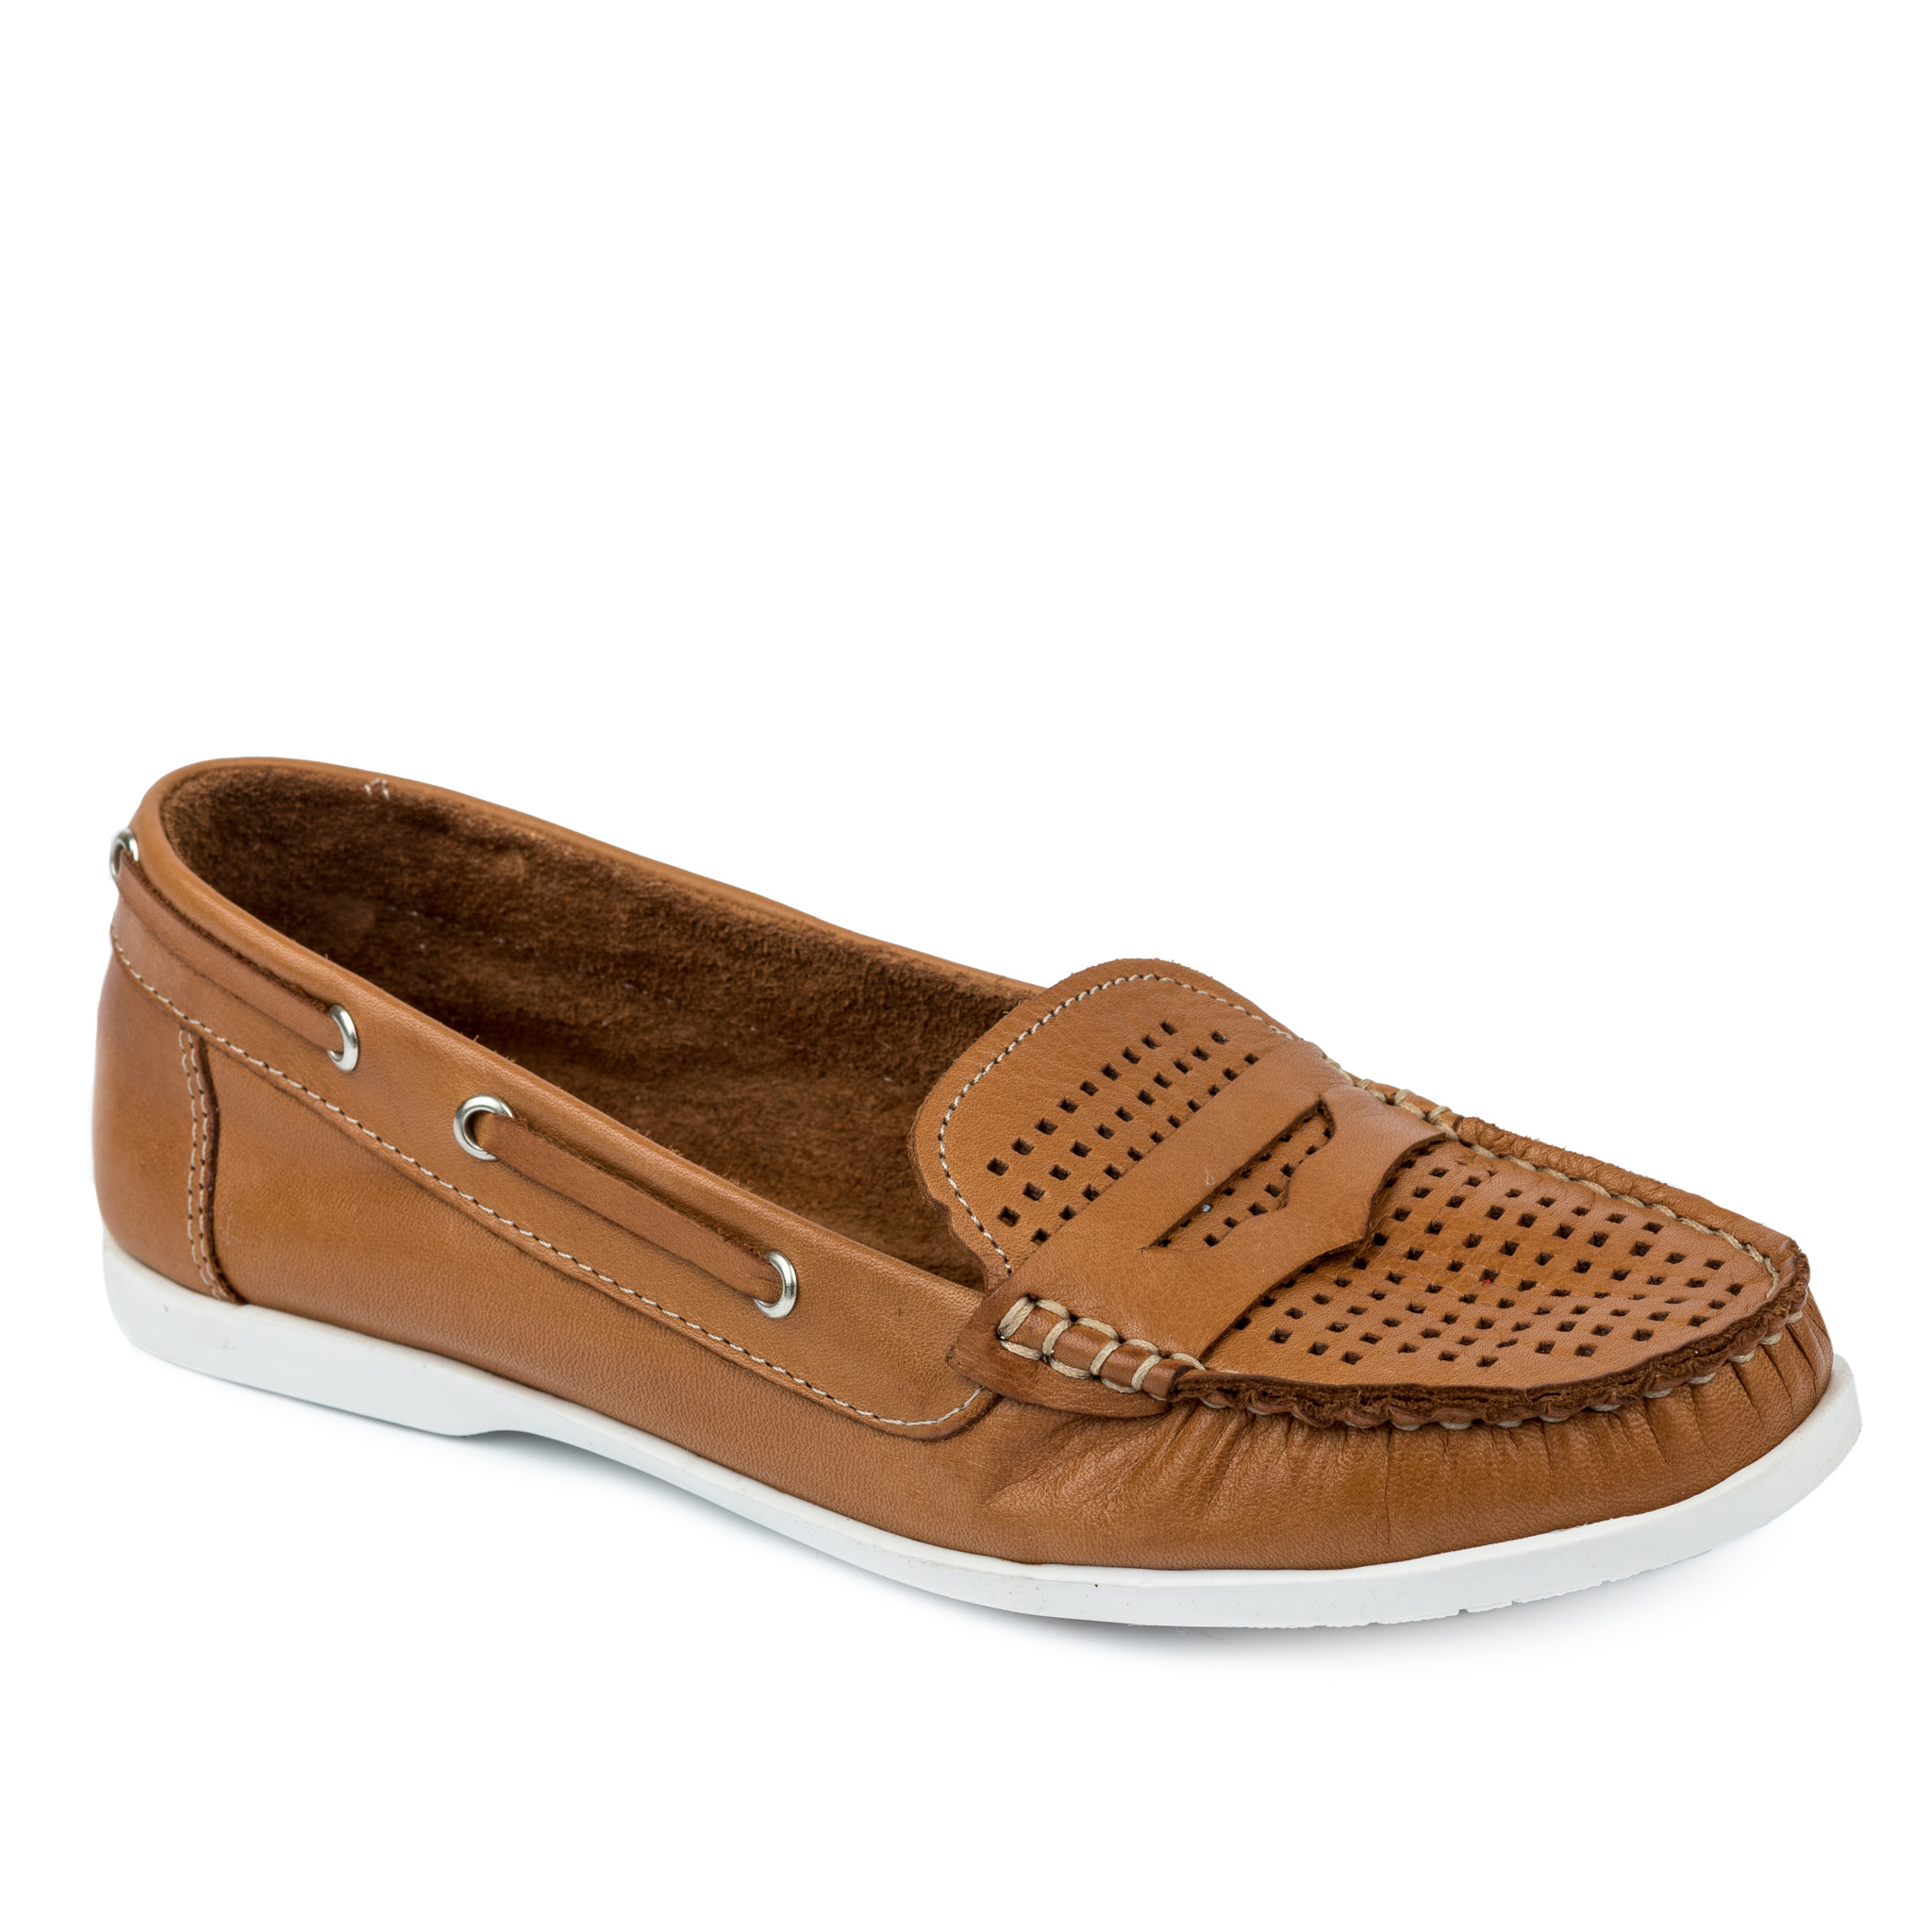 Leather moccasins A597 - CAMEL